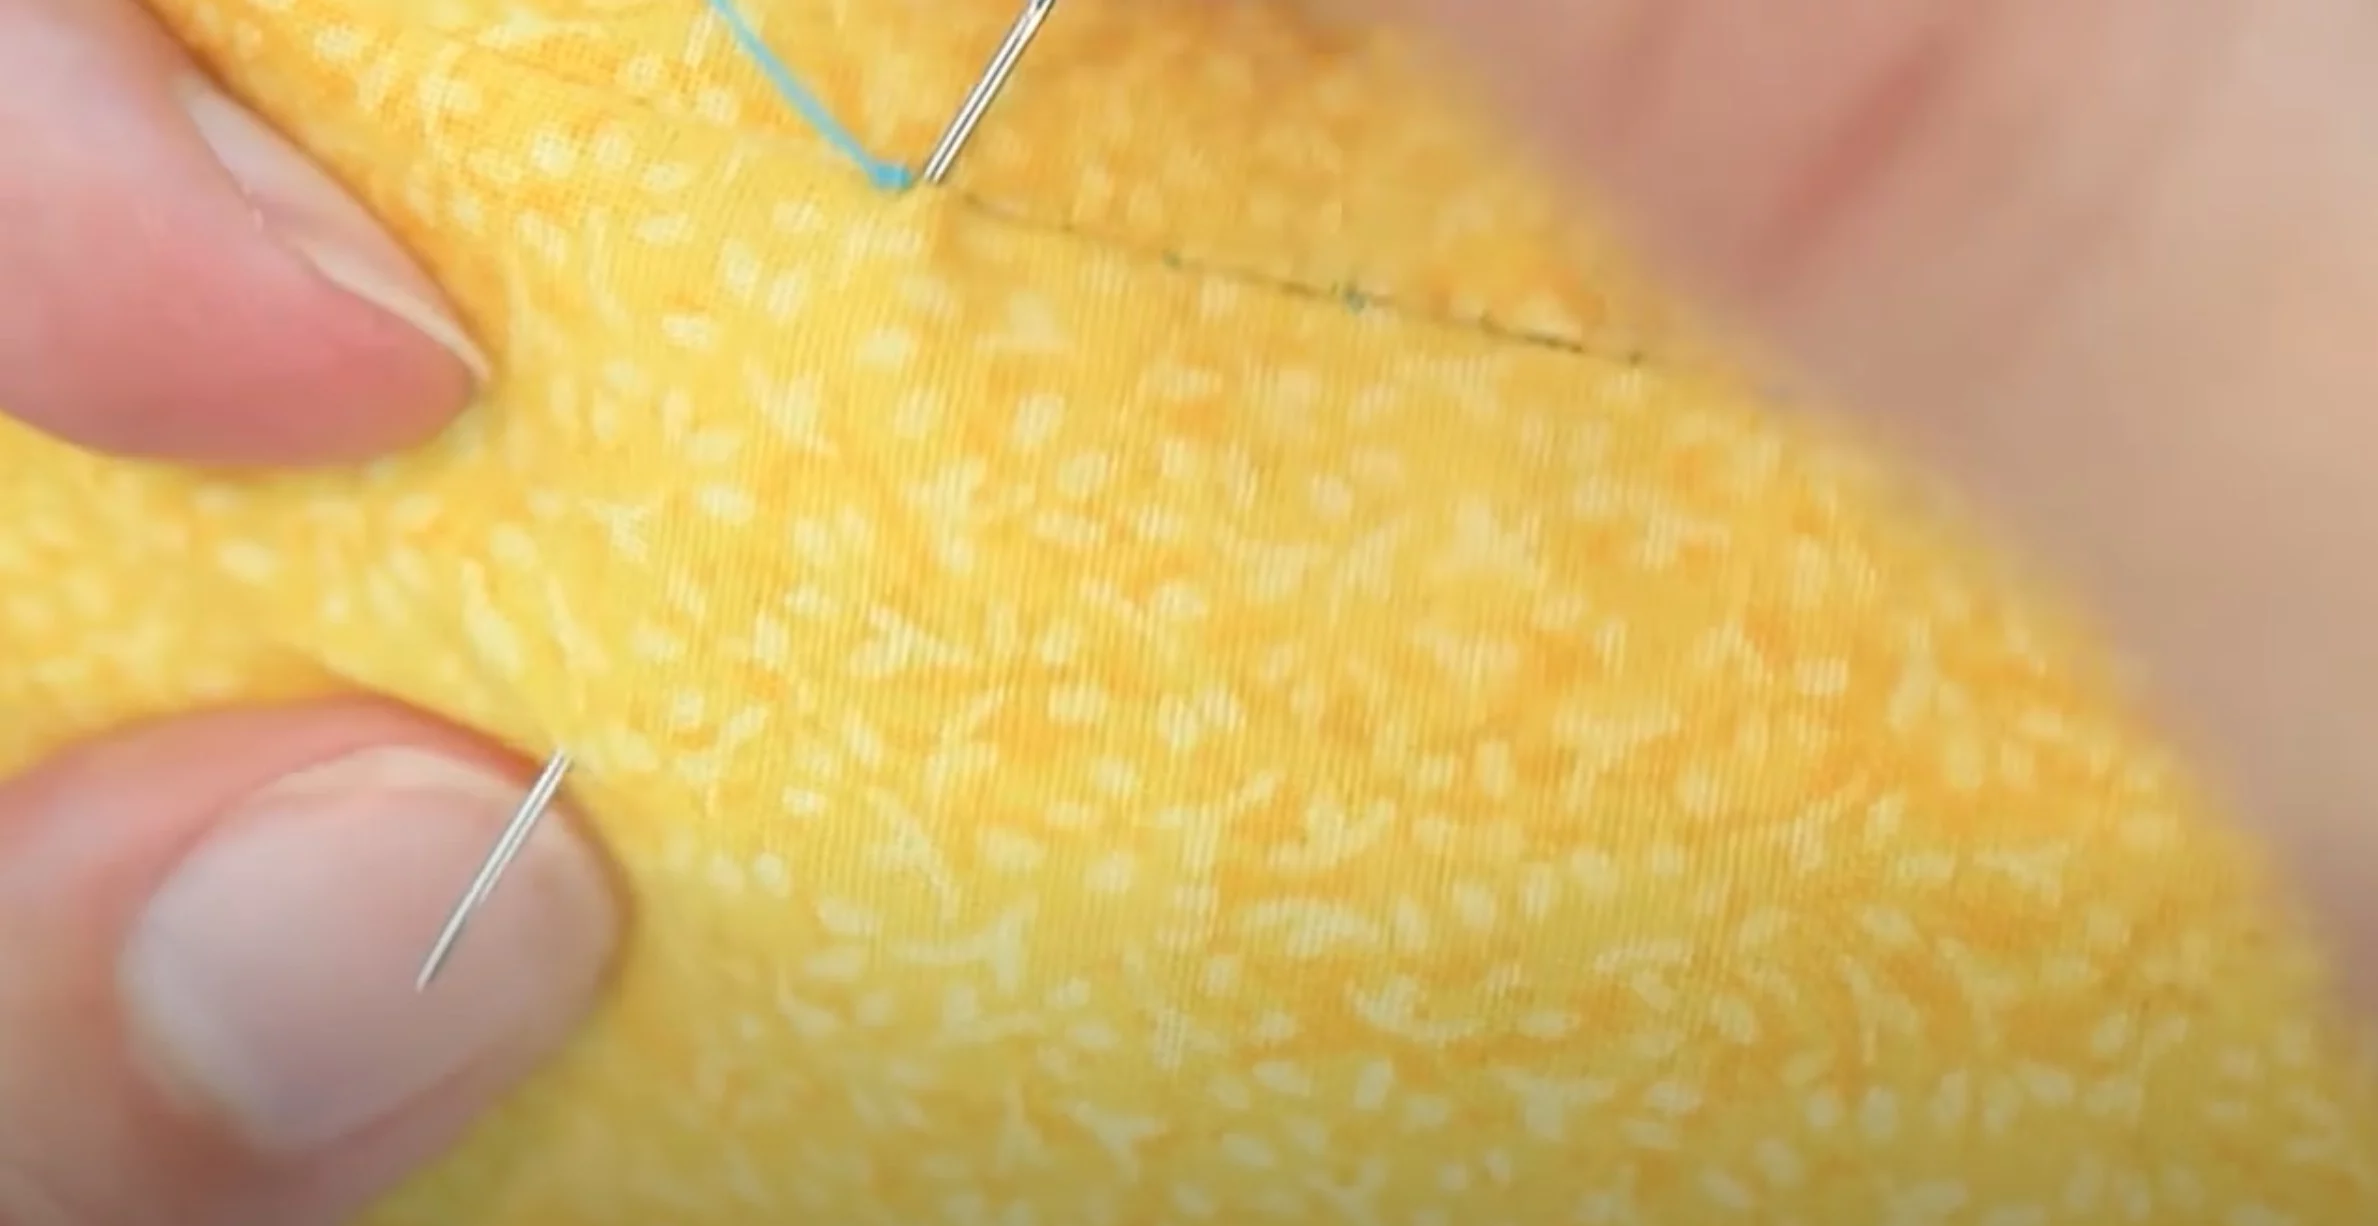 hide the knot by threading the needle into the seam and out the side of the fabric